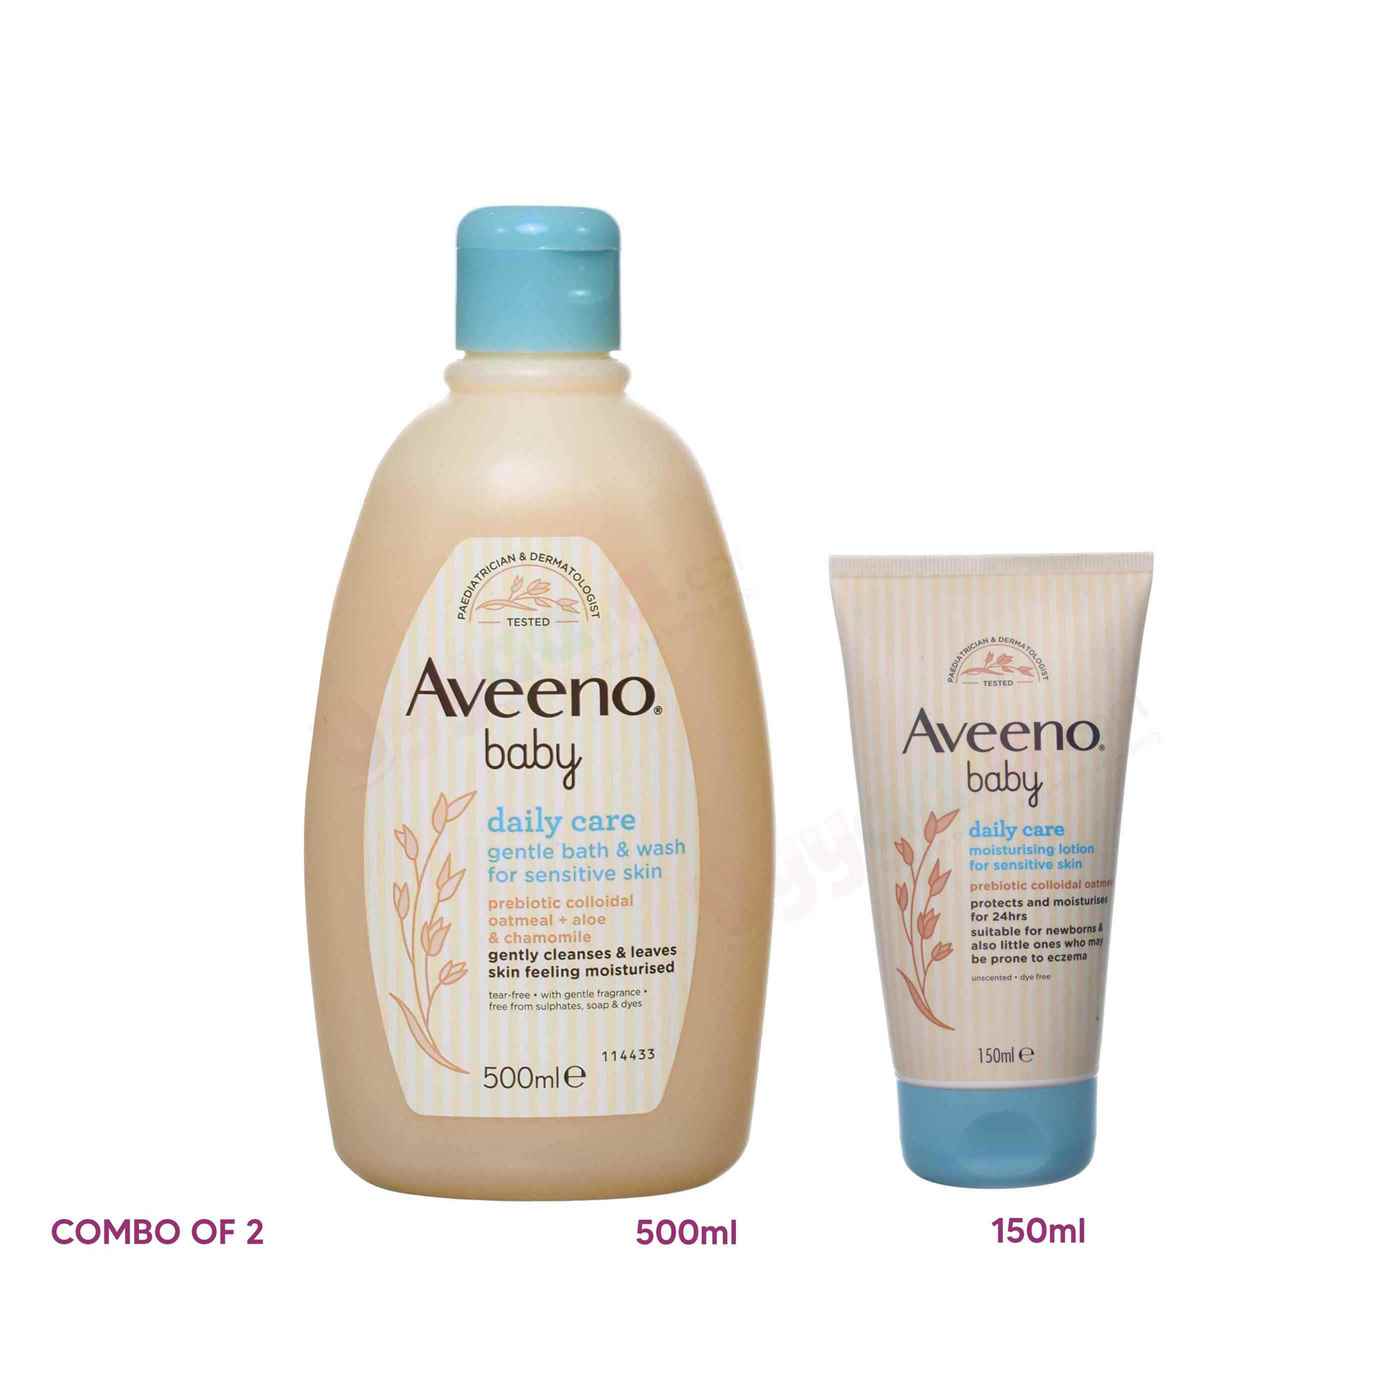 AVEENO BABY daily care moisturising lotion for sensitive skin 150ml and daily care gentle bath & wash for sensitive skin 500ml